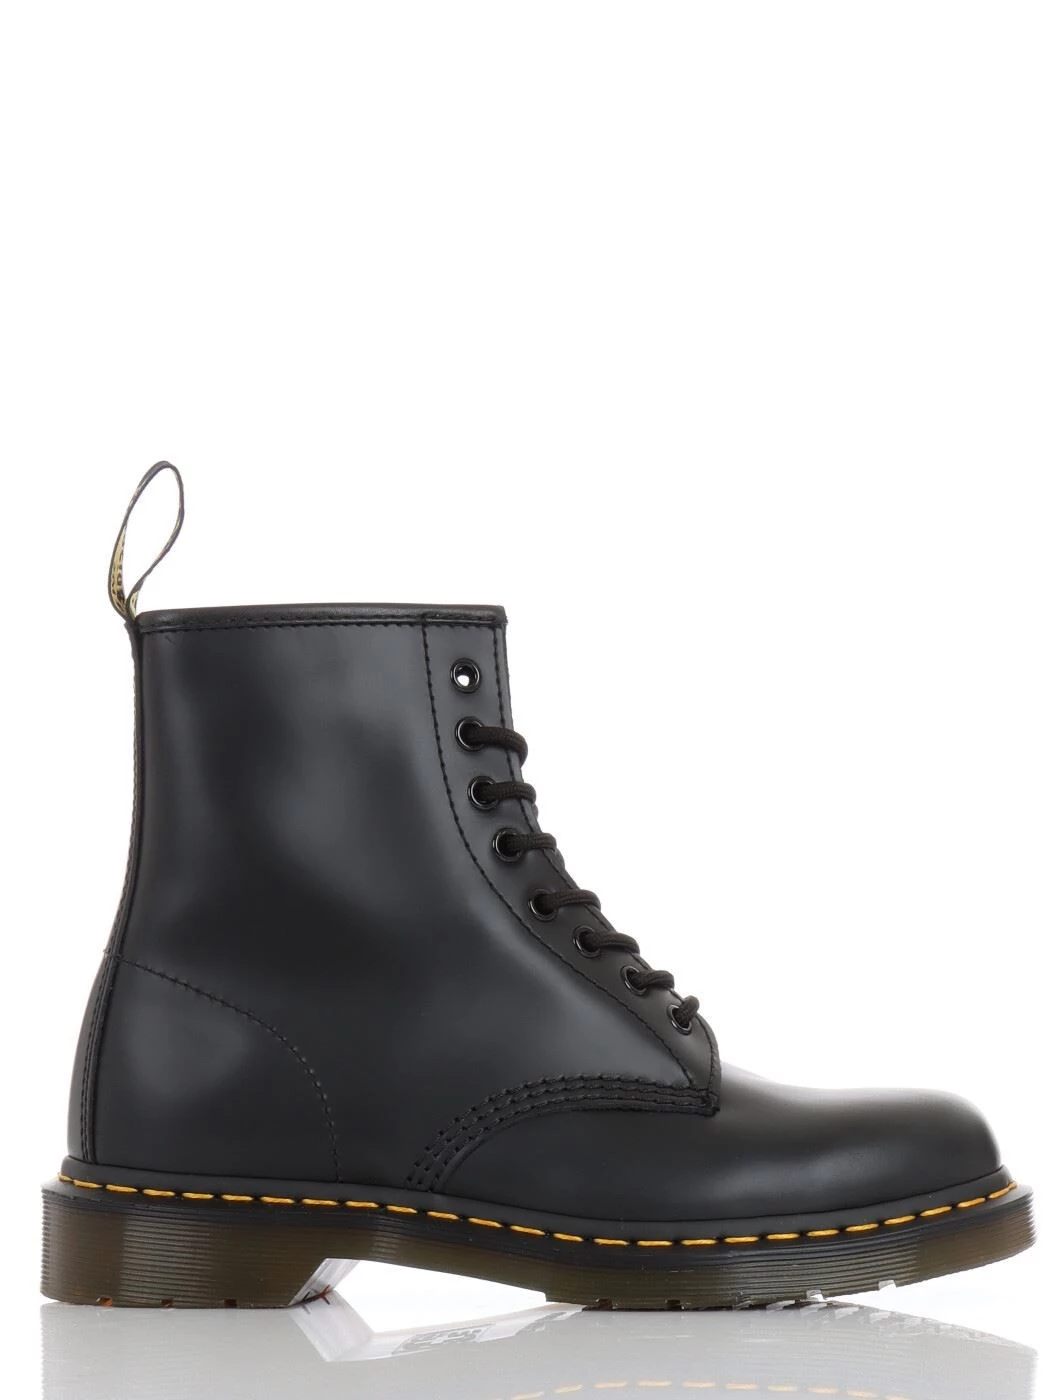 ANFIBI DR.MARTENS 1460 SMOOTH